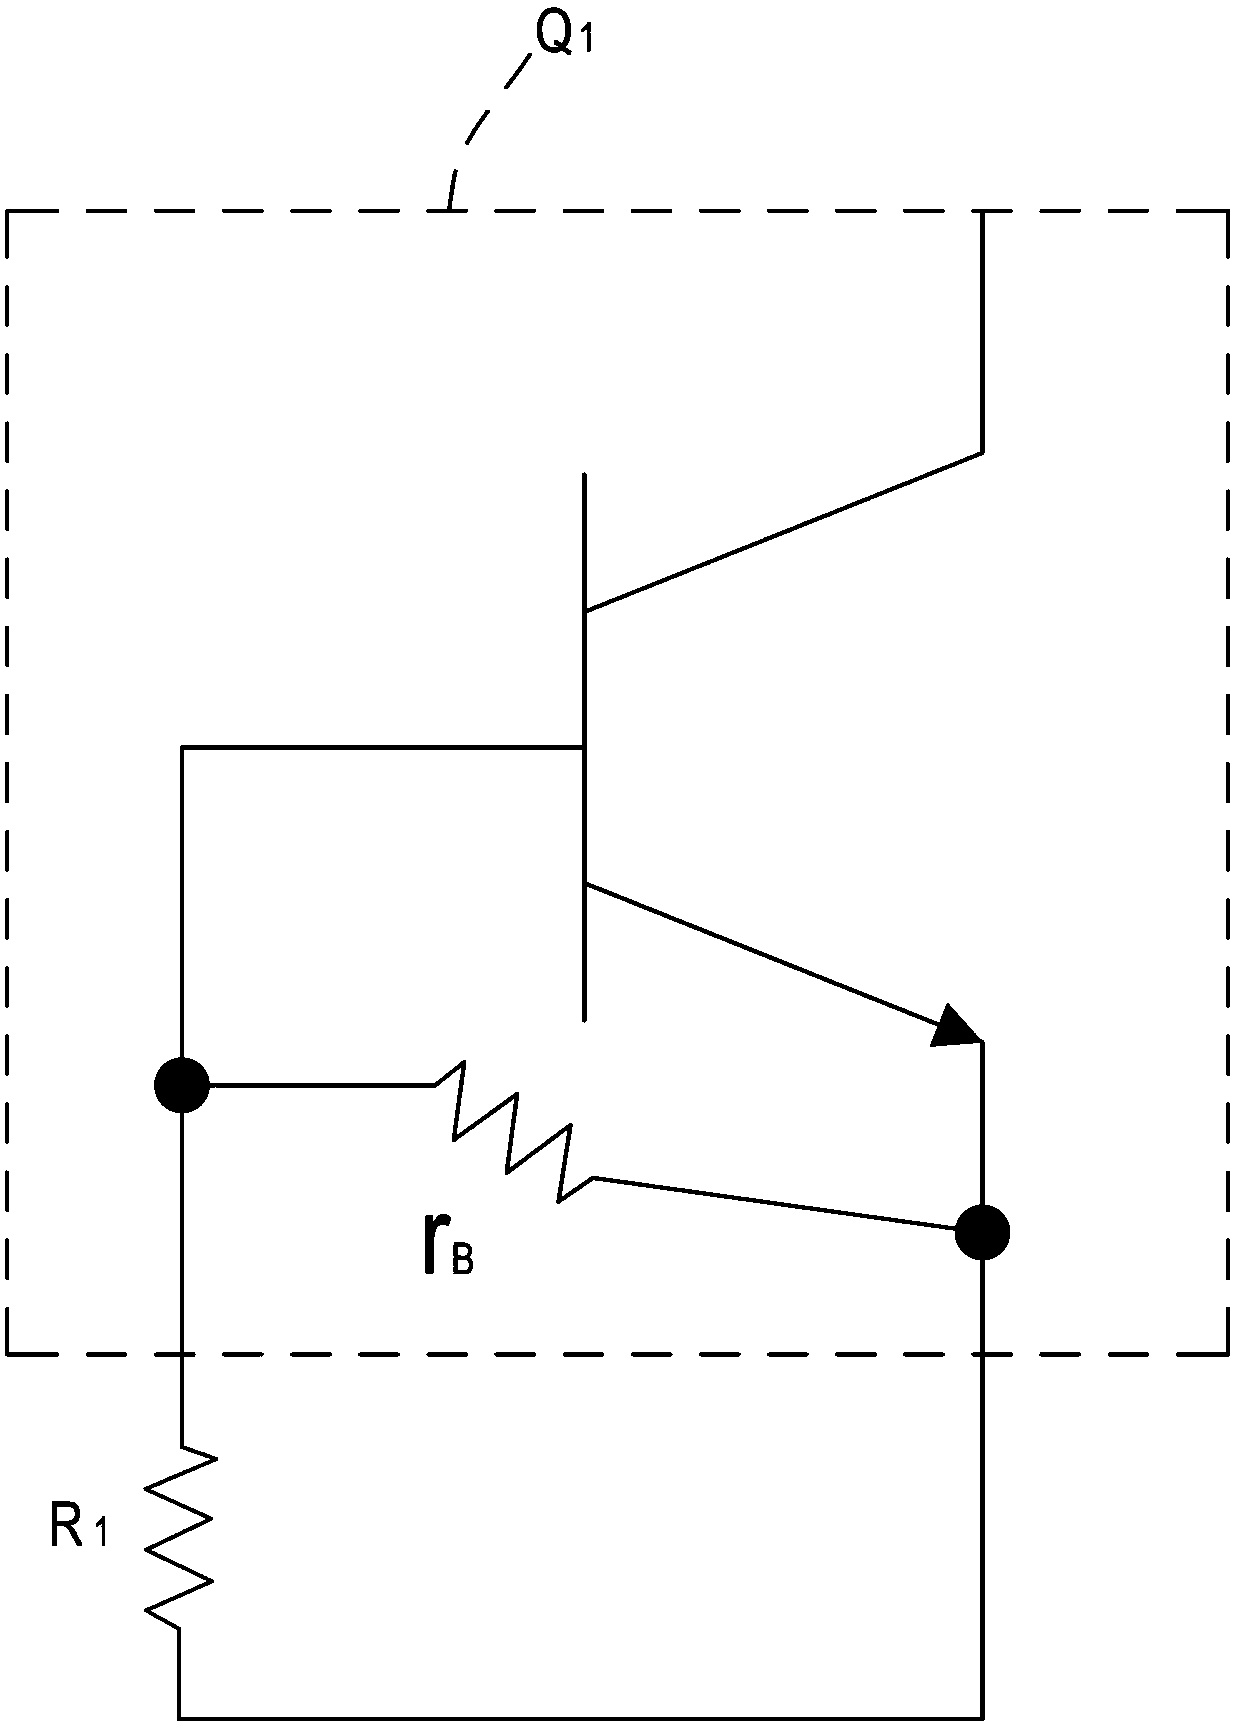 Self-excited push-pull conversion circuit